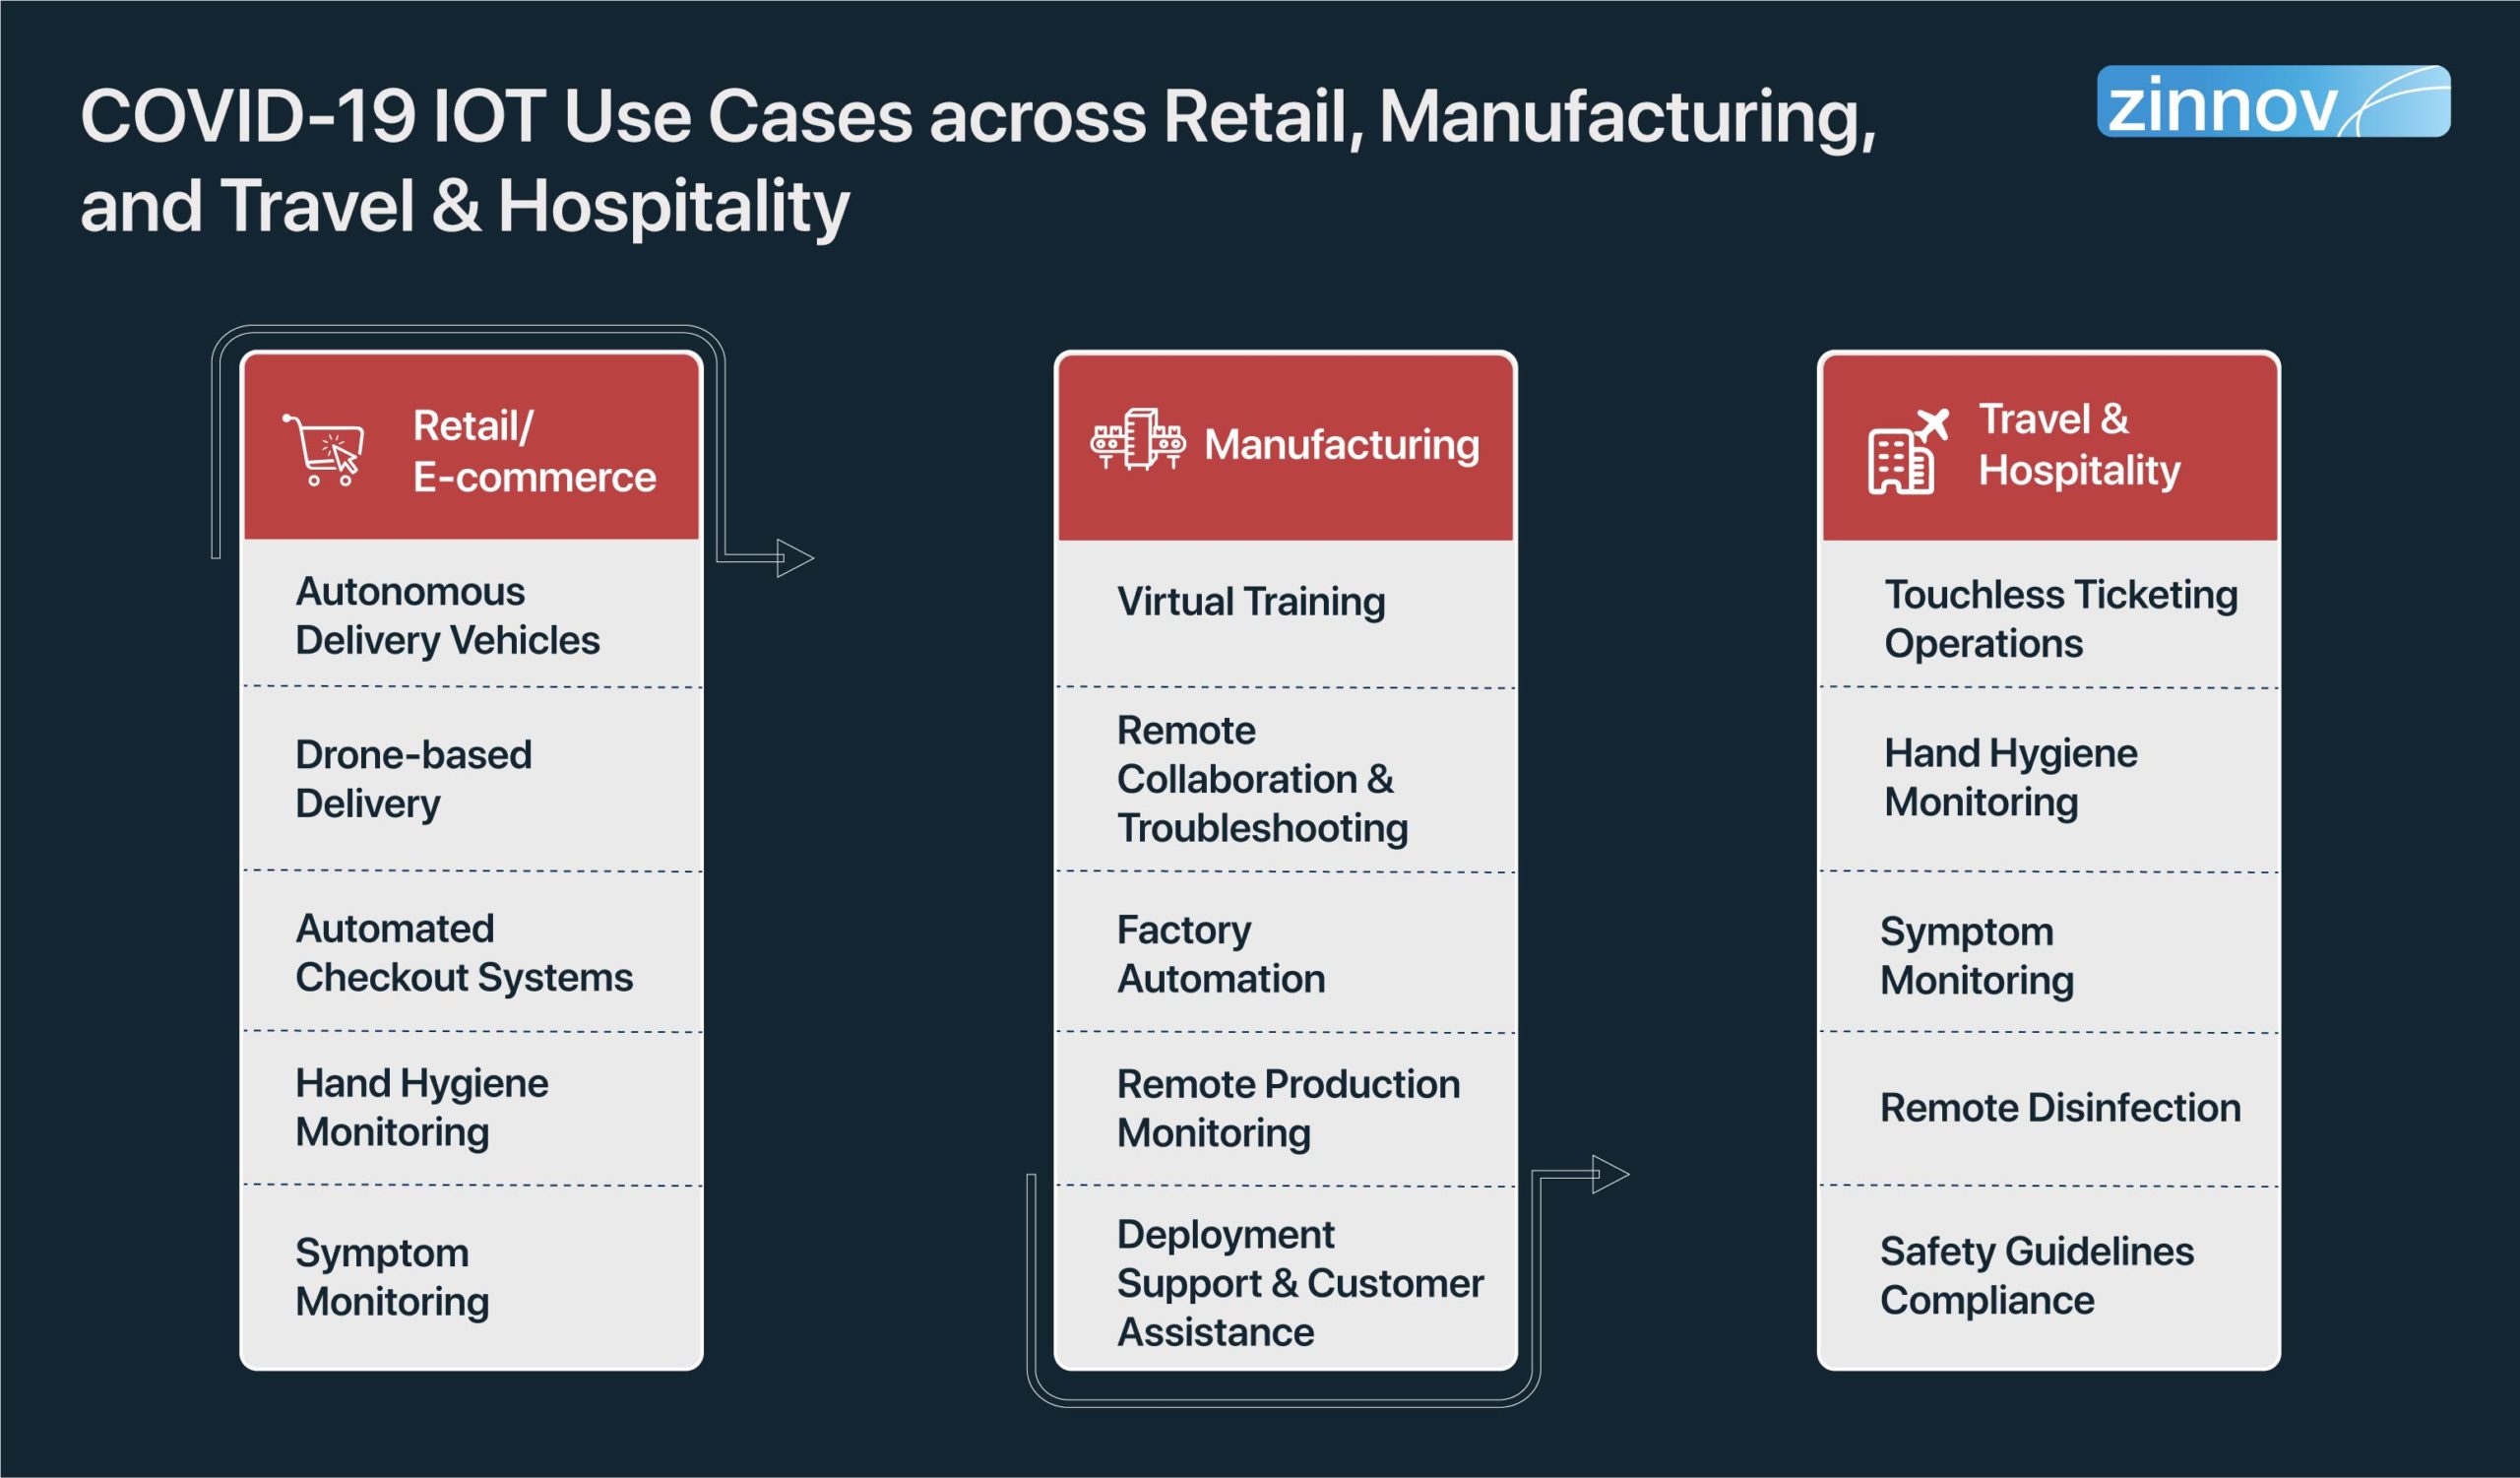 COVID-19 IOT use across retail, manufacturing, and travel & hospitality